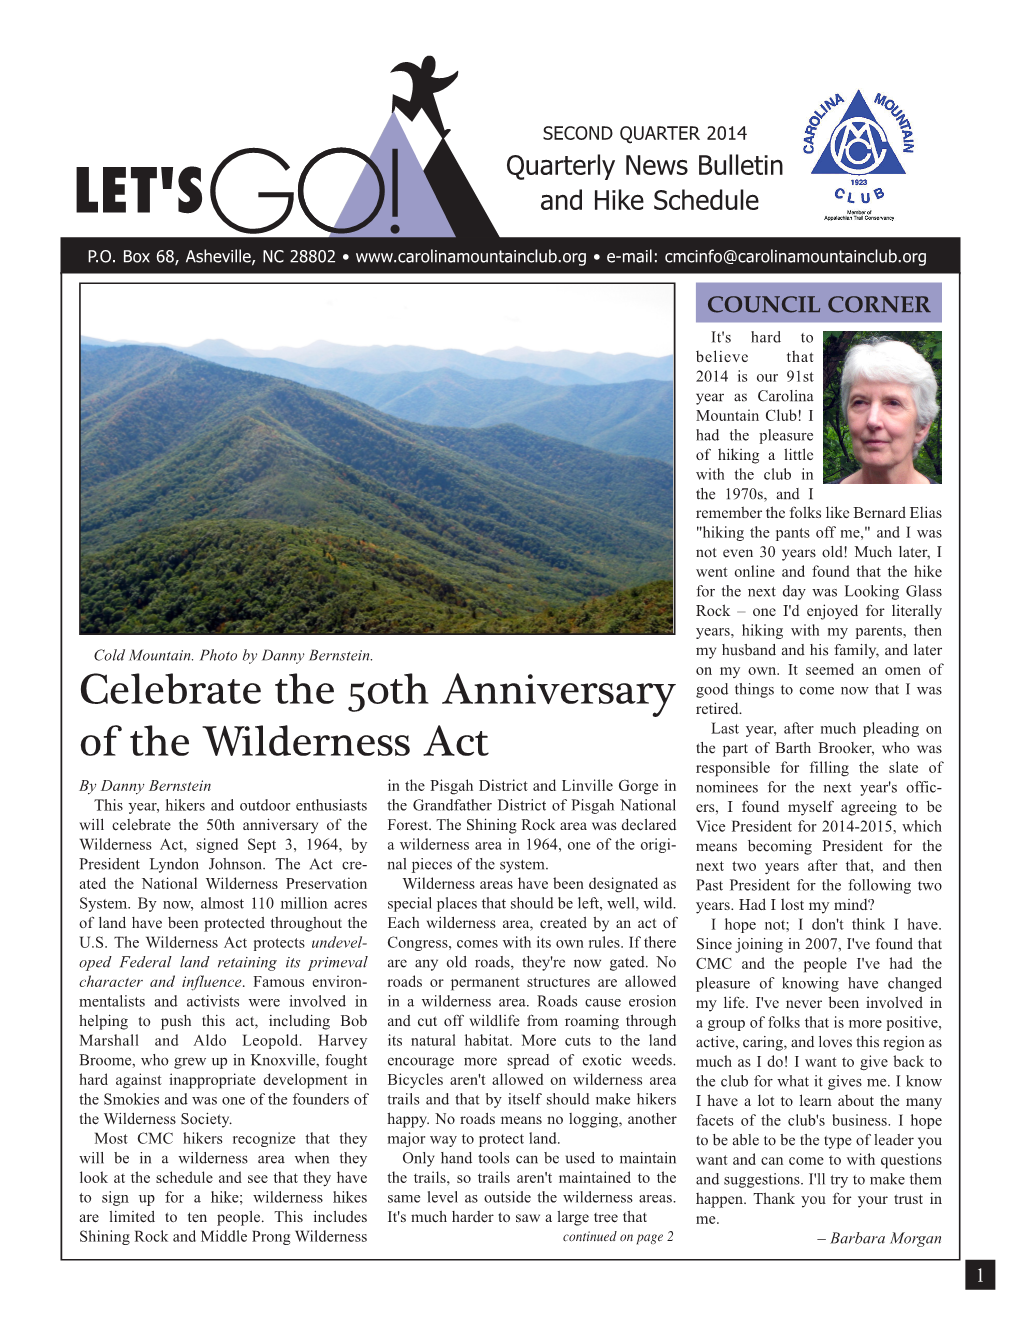 Celebrate the 50Th Anniversary of the Wilderness